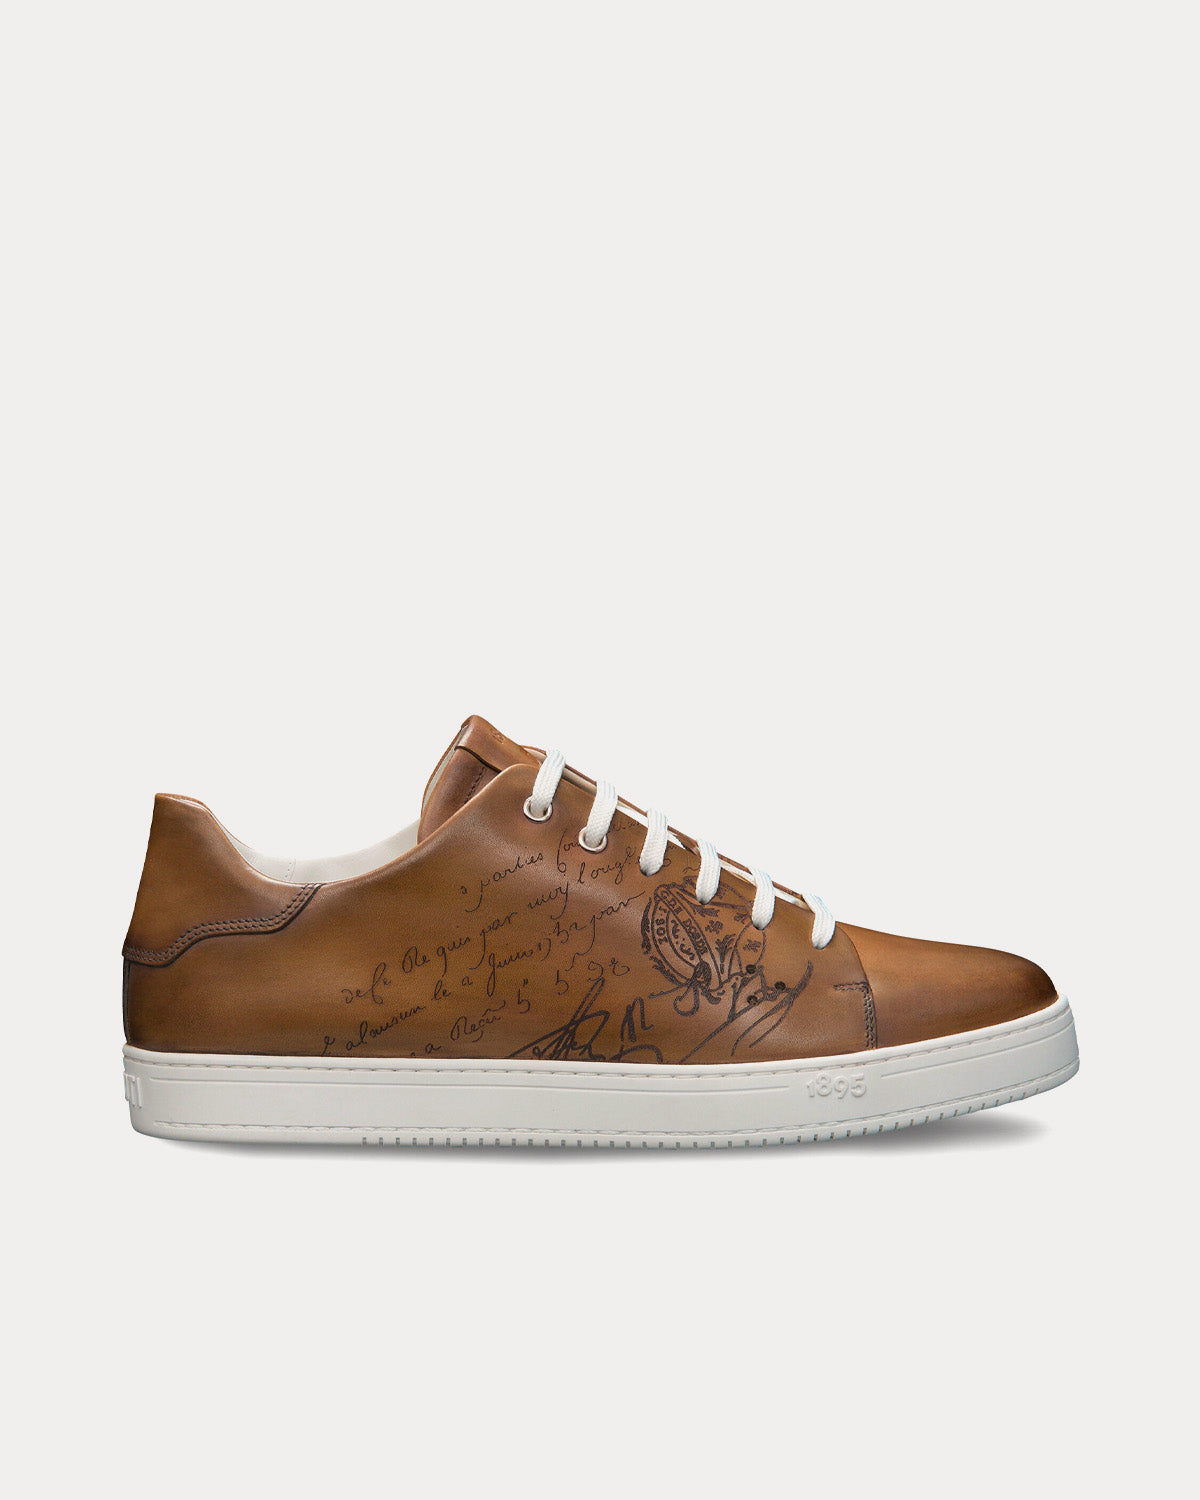 Berluti - Playtime Scritto Leather Olive Low Top Sneakers